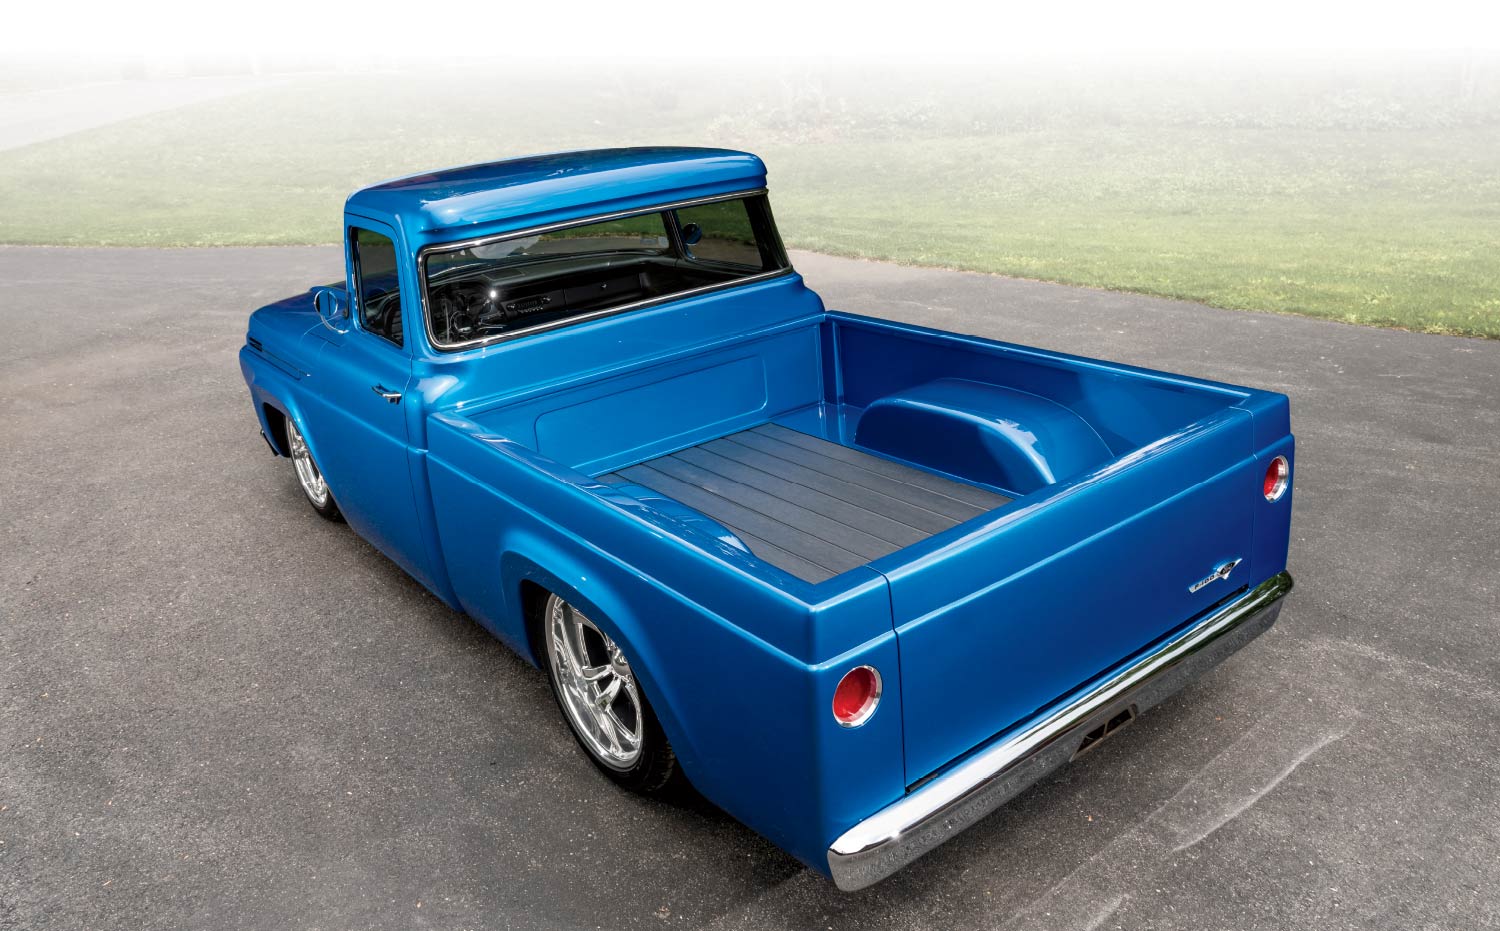 Image of Ford F-100's Rear